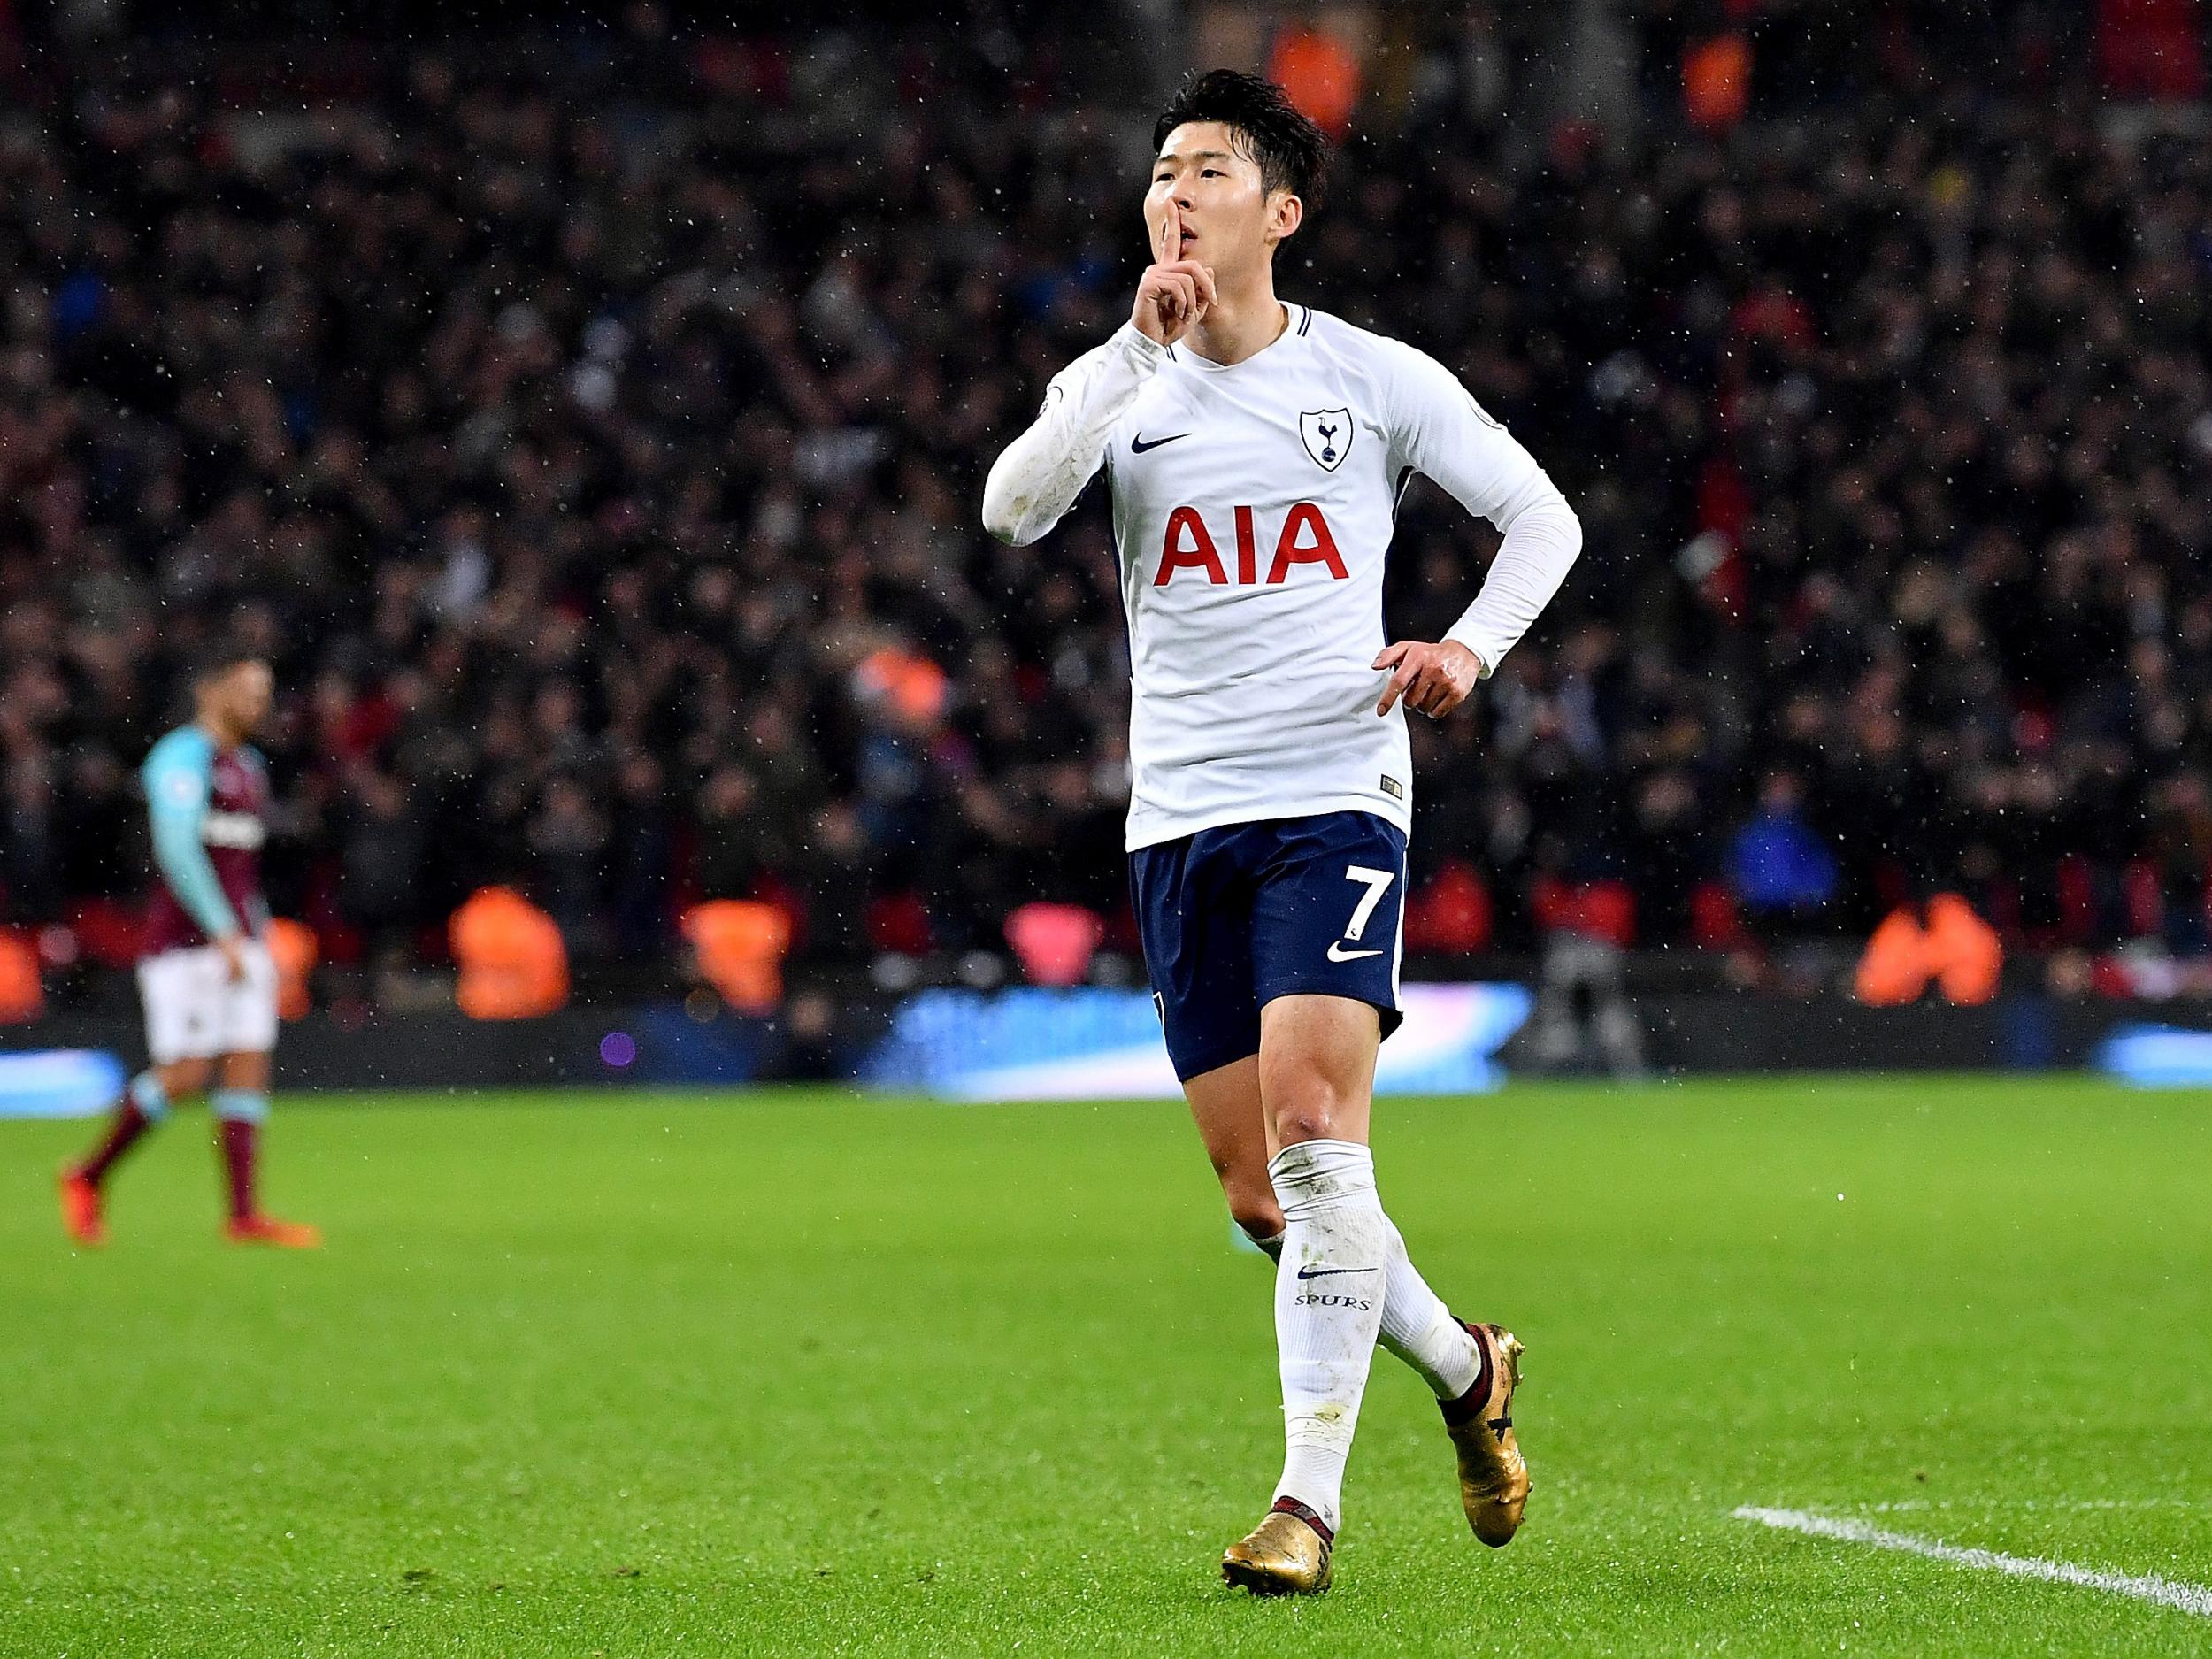 It was a case of 'anything you can do' for Son and Spurs